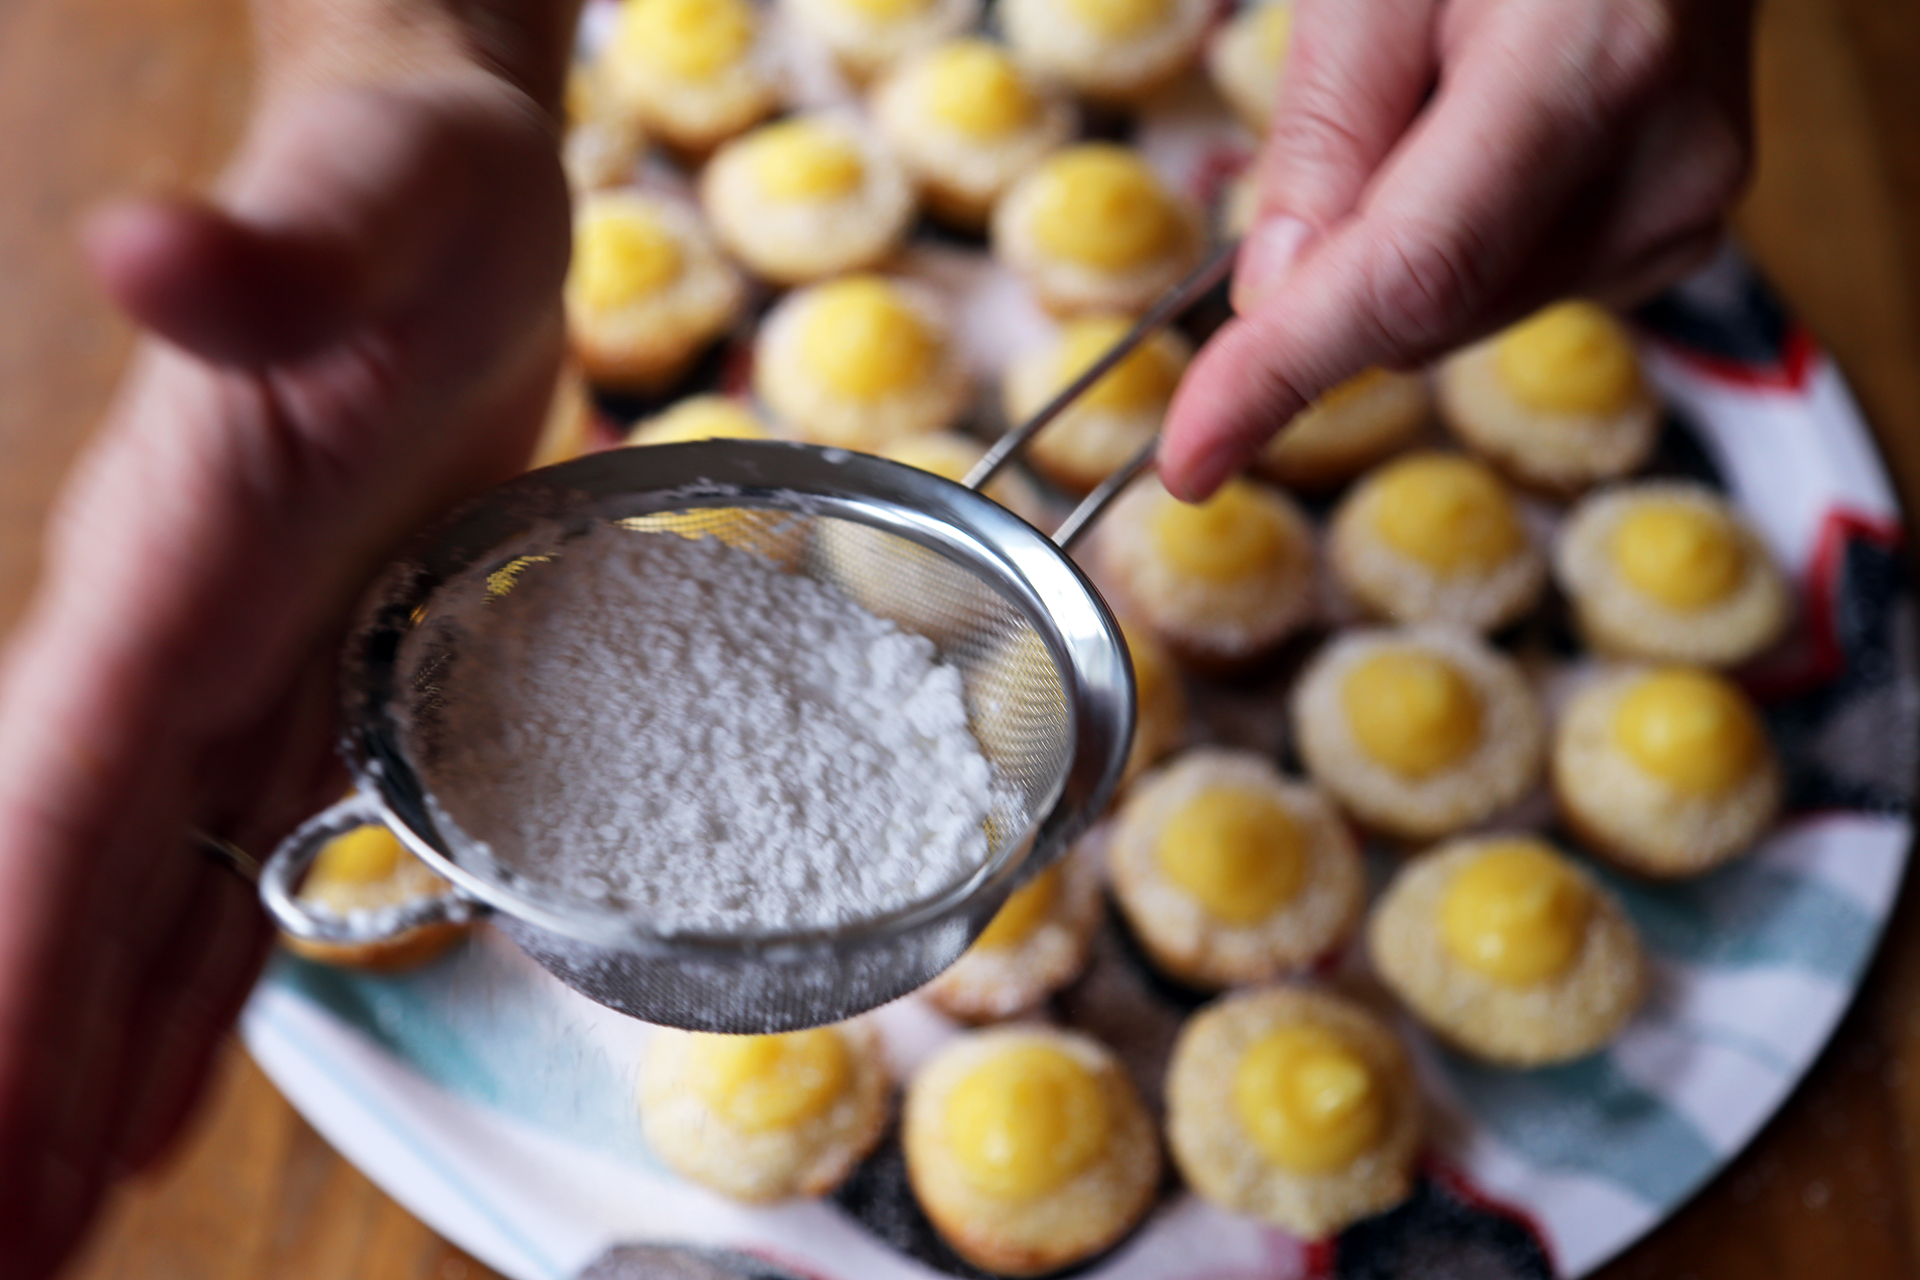 To serve, dust the cupcakes with powdered sugar.